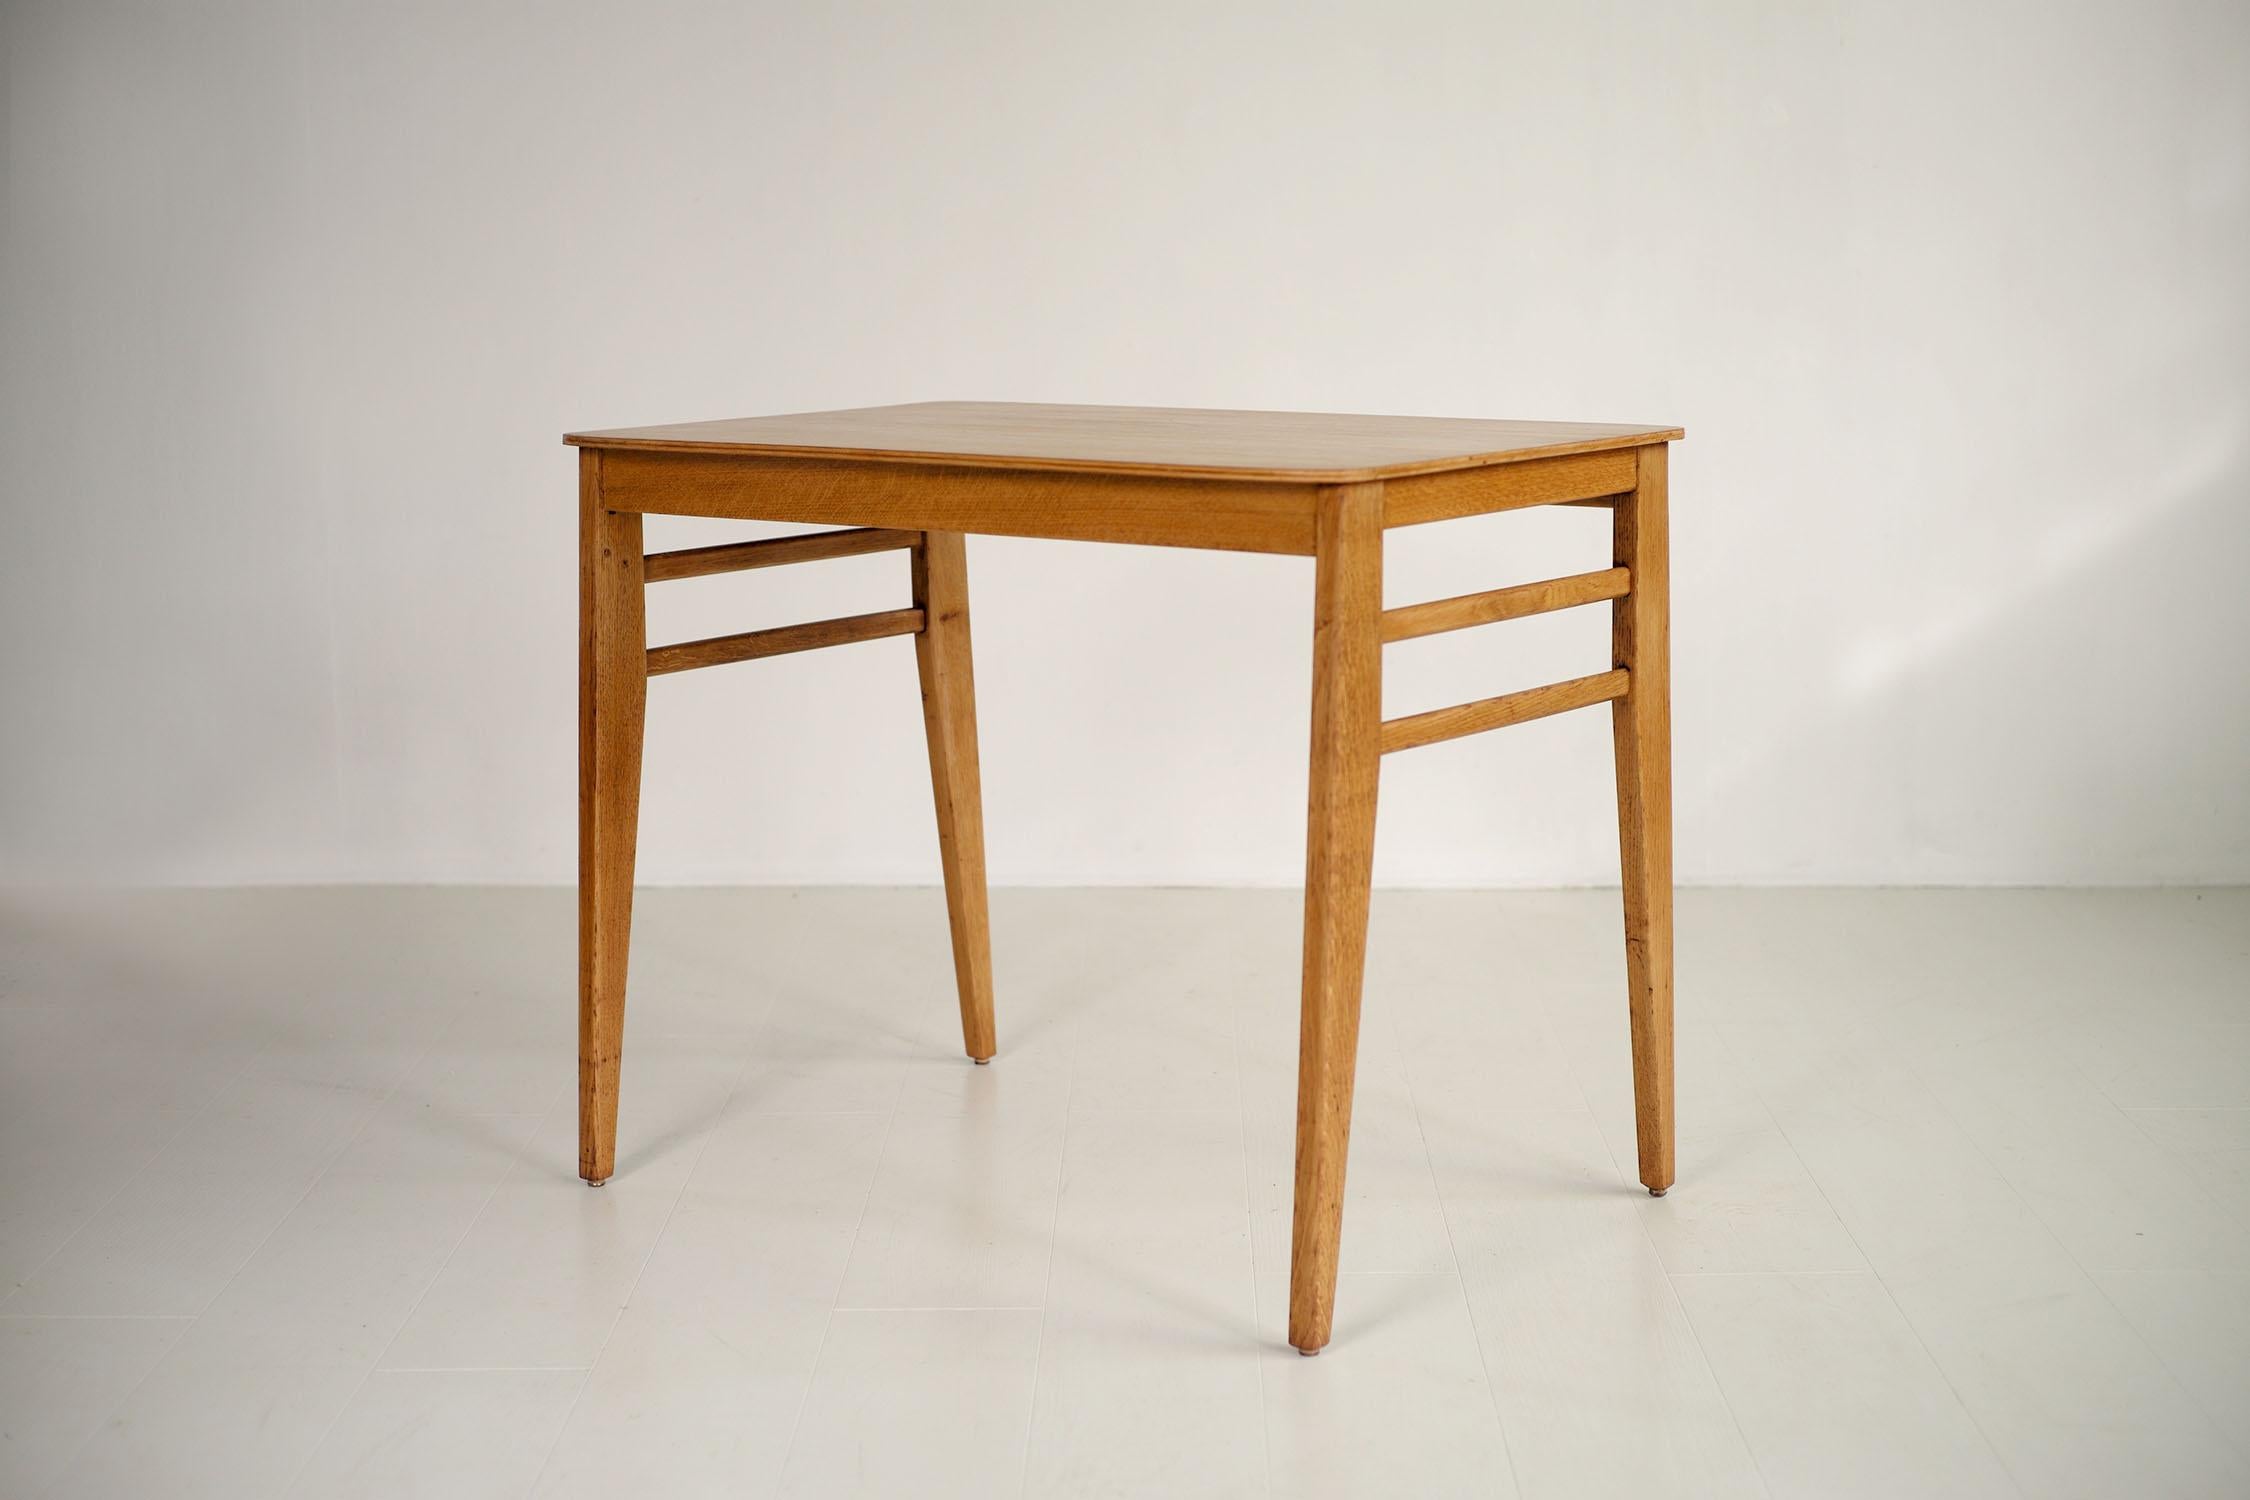 Marcel Gascoin (1907-1986), “TC” table in light oak, ARHEC edition, France 1950.
Father of Rationalism and major player in French Reconstruction, Marcel Gascoin designs quality furniture with clean lines with his design office, ARHEC (Rational